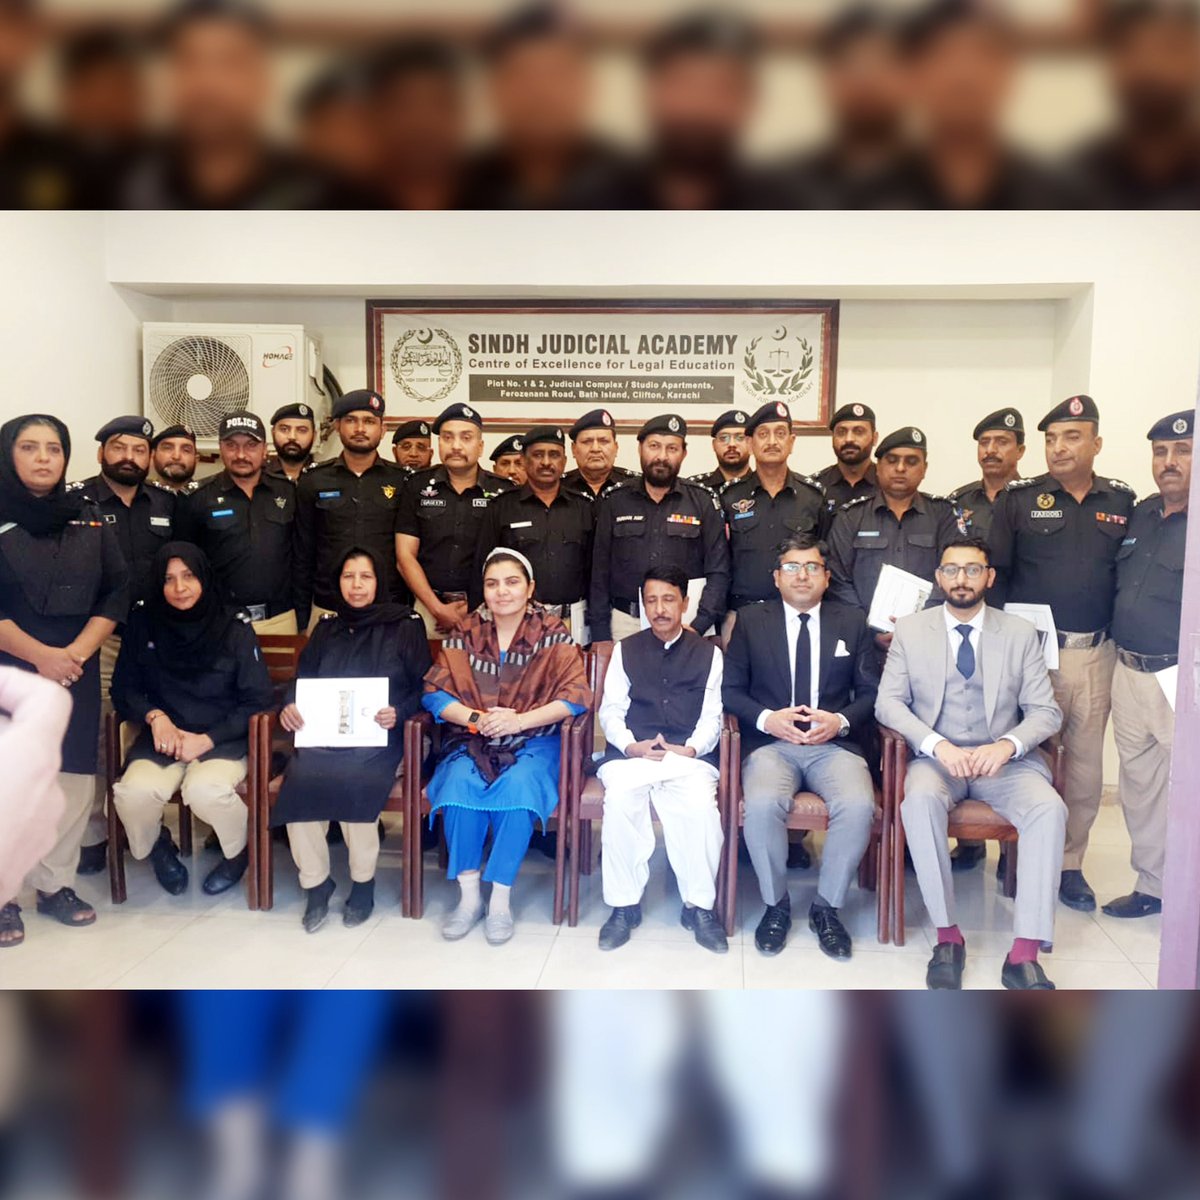 We recently engaged with different justice sector actors. We trained the batches of #Lawyers and #Police Officers on personal laws of Religious Minorities, tackling sensitivities around #blasphemy law, and stages of ethical considerations when dealing with blasphemy accusations.